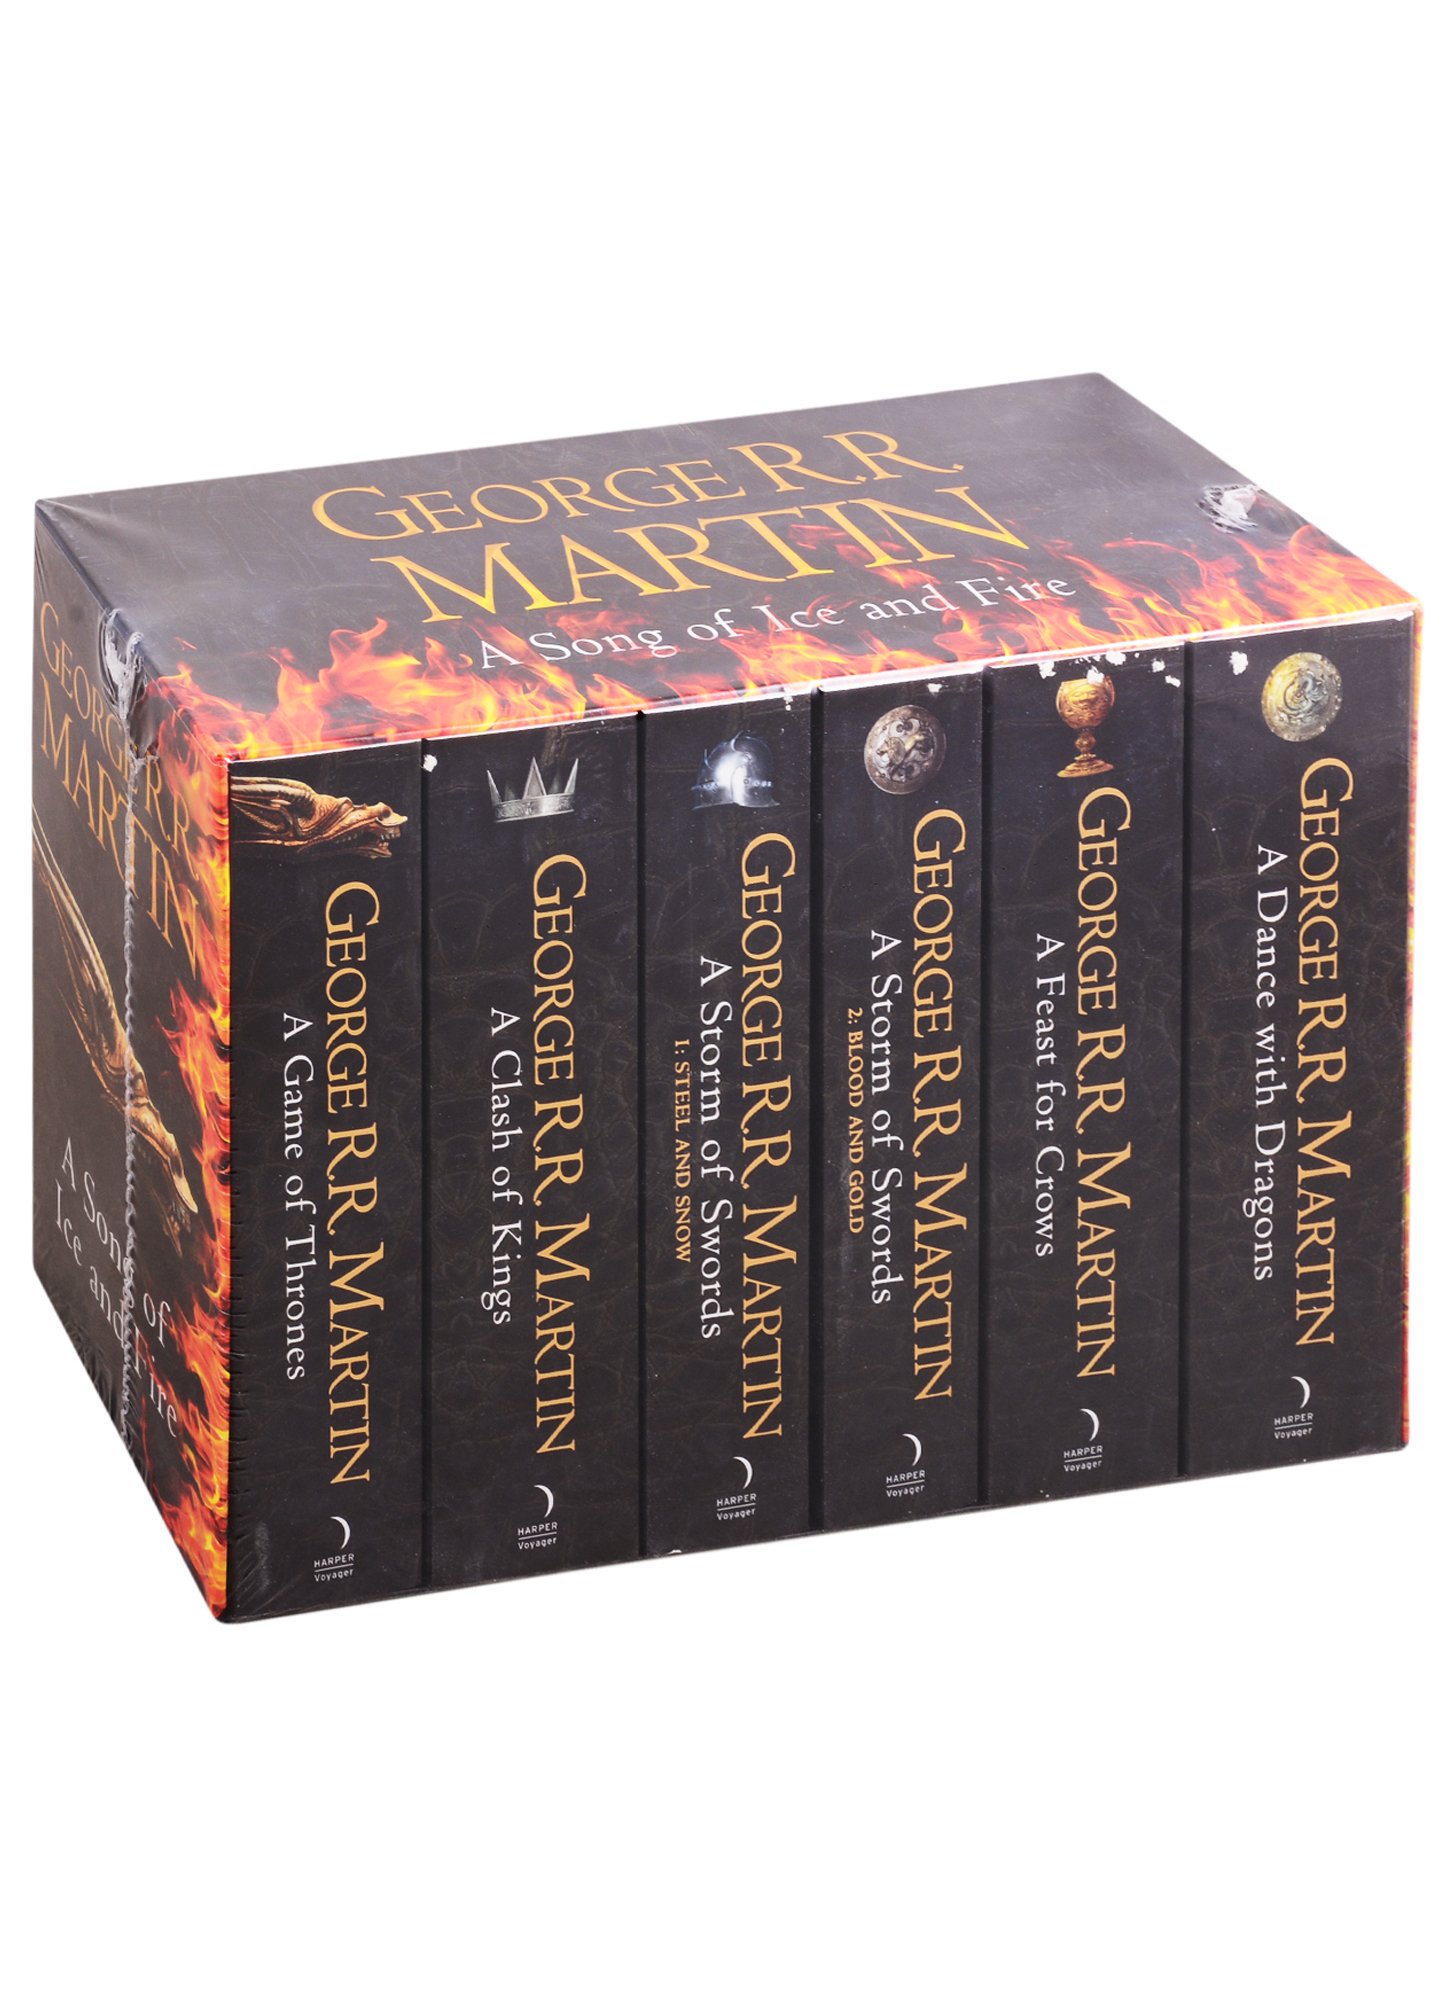 Martin George Raymond Richard Song of Ice and Fire-Game of Thrones: The complete box set of all 6 books Martin George R. R. jordan r a crown of swords